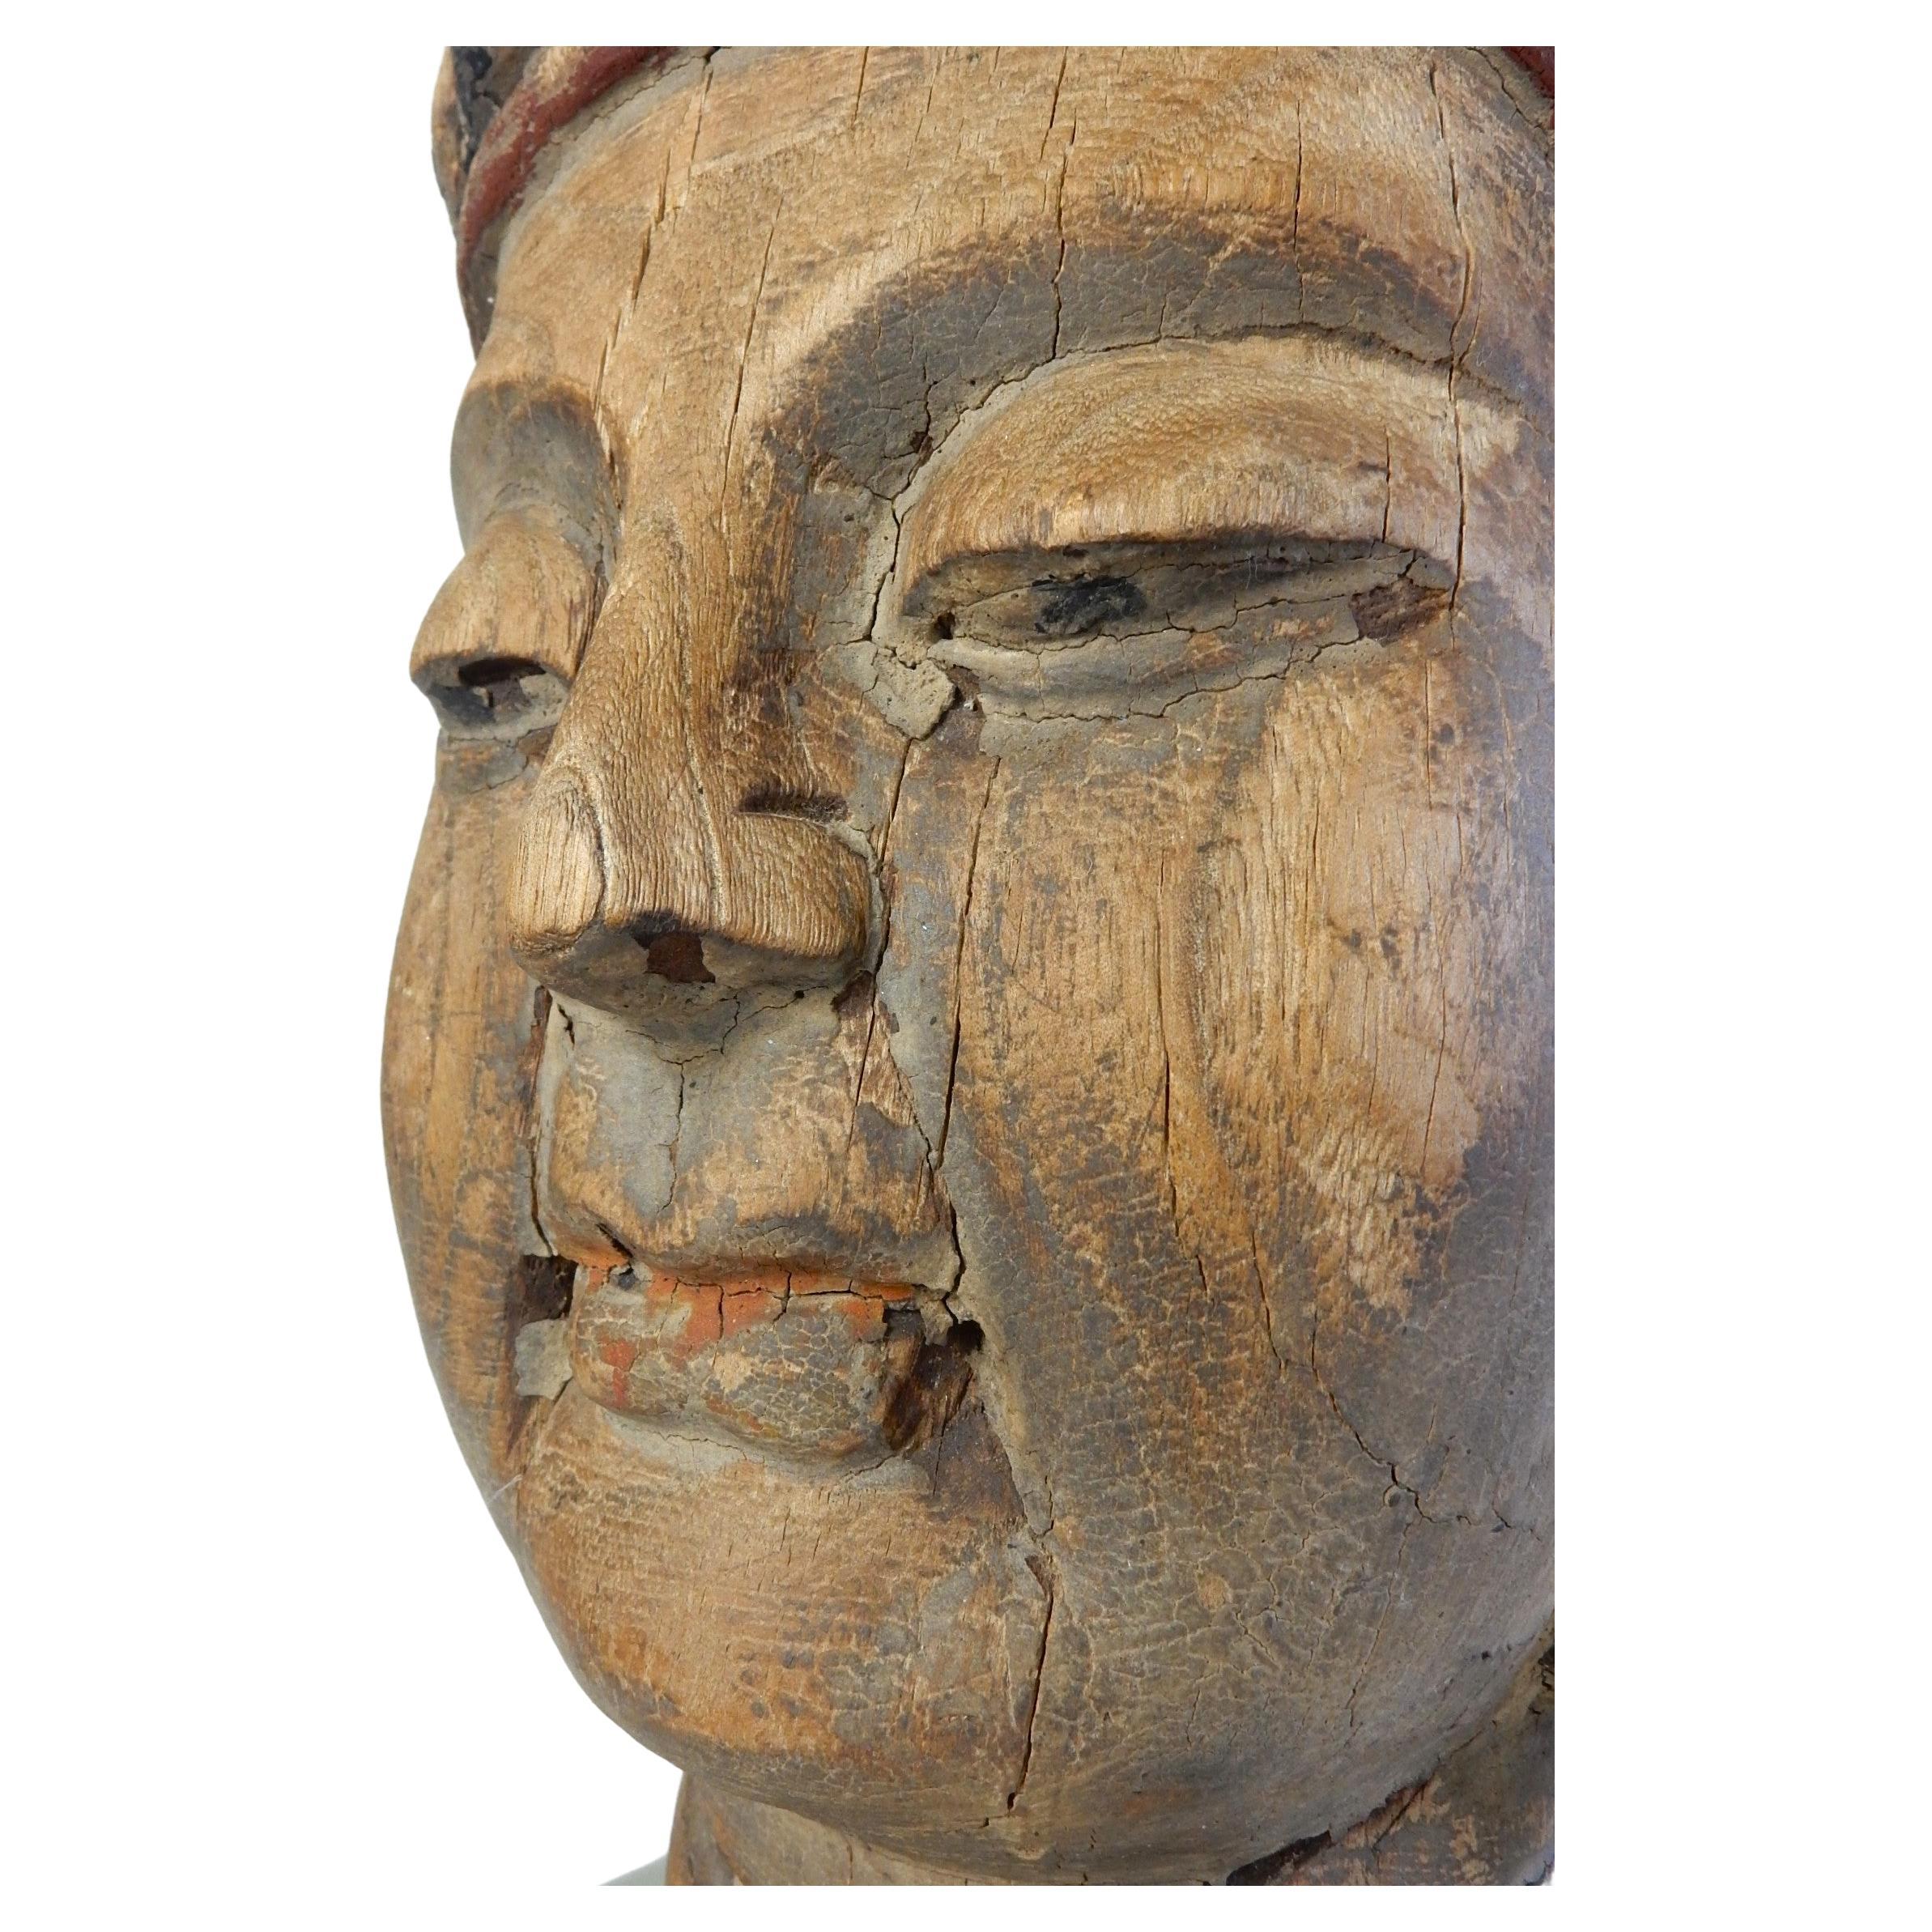 Exquisite hand carved head of Buddha.
We are not experts so we're guessing this pieces age. Could be much older.
Wonderful decoration piece sat on a plinth of old green sidewalk glass.
Stands 20in tall X 7-1/2in X 8in.